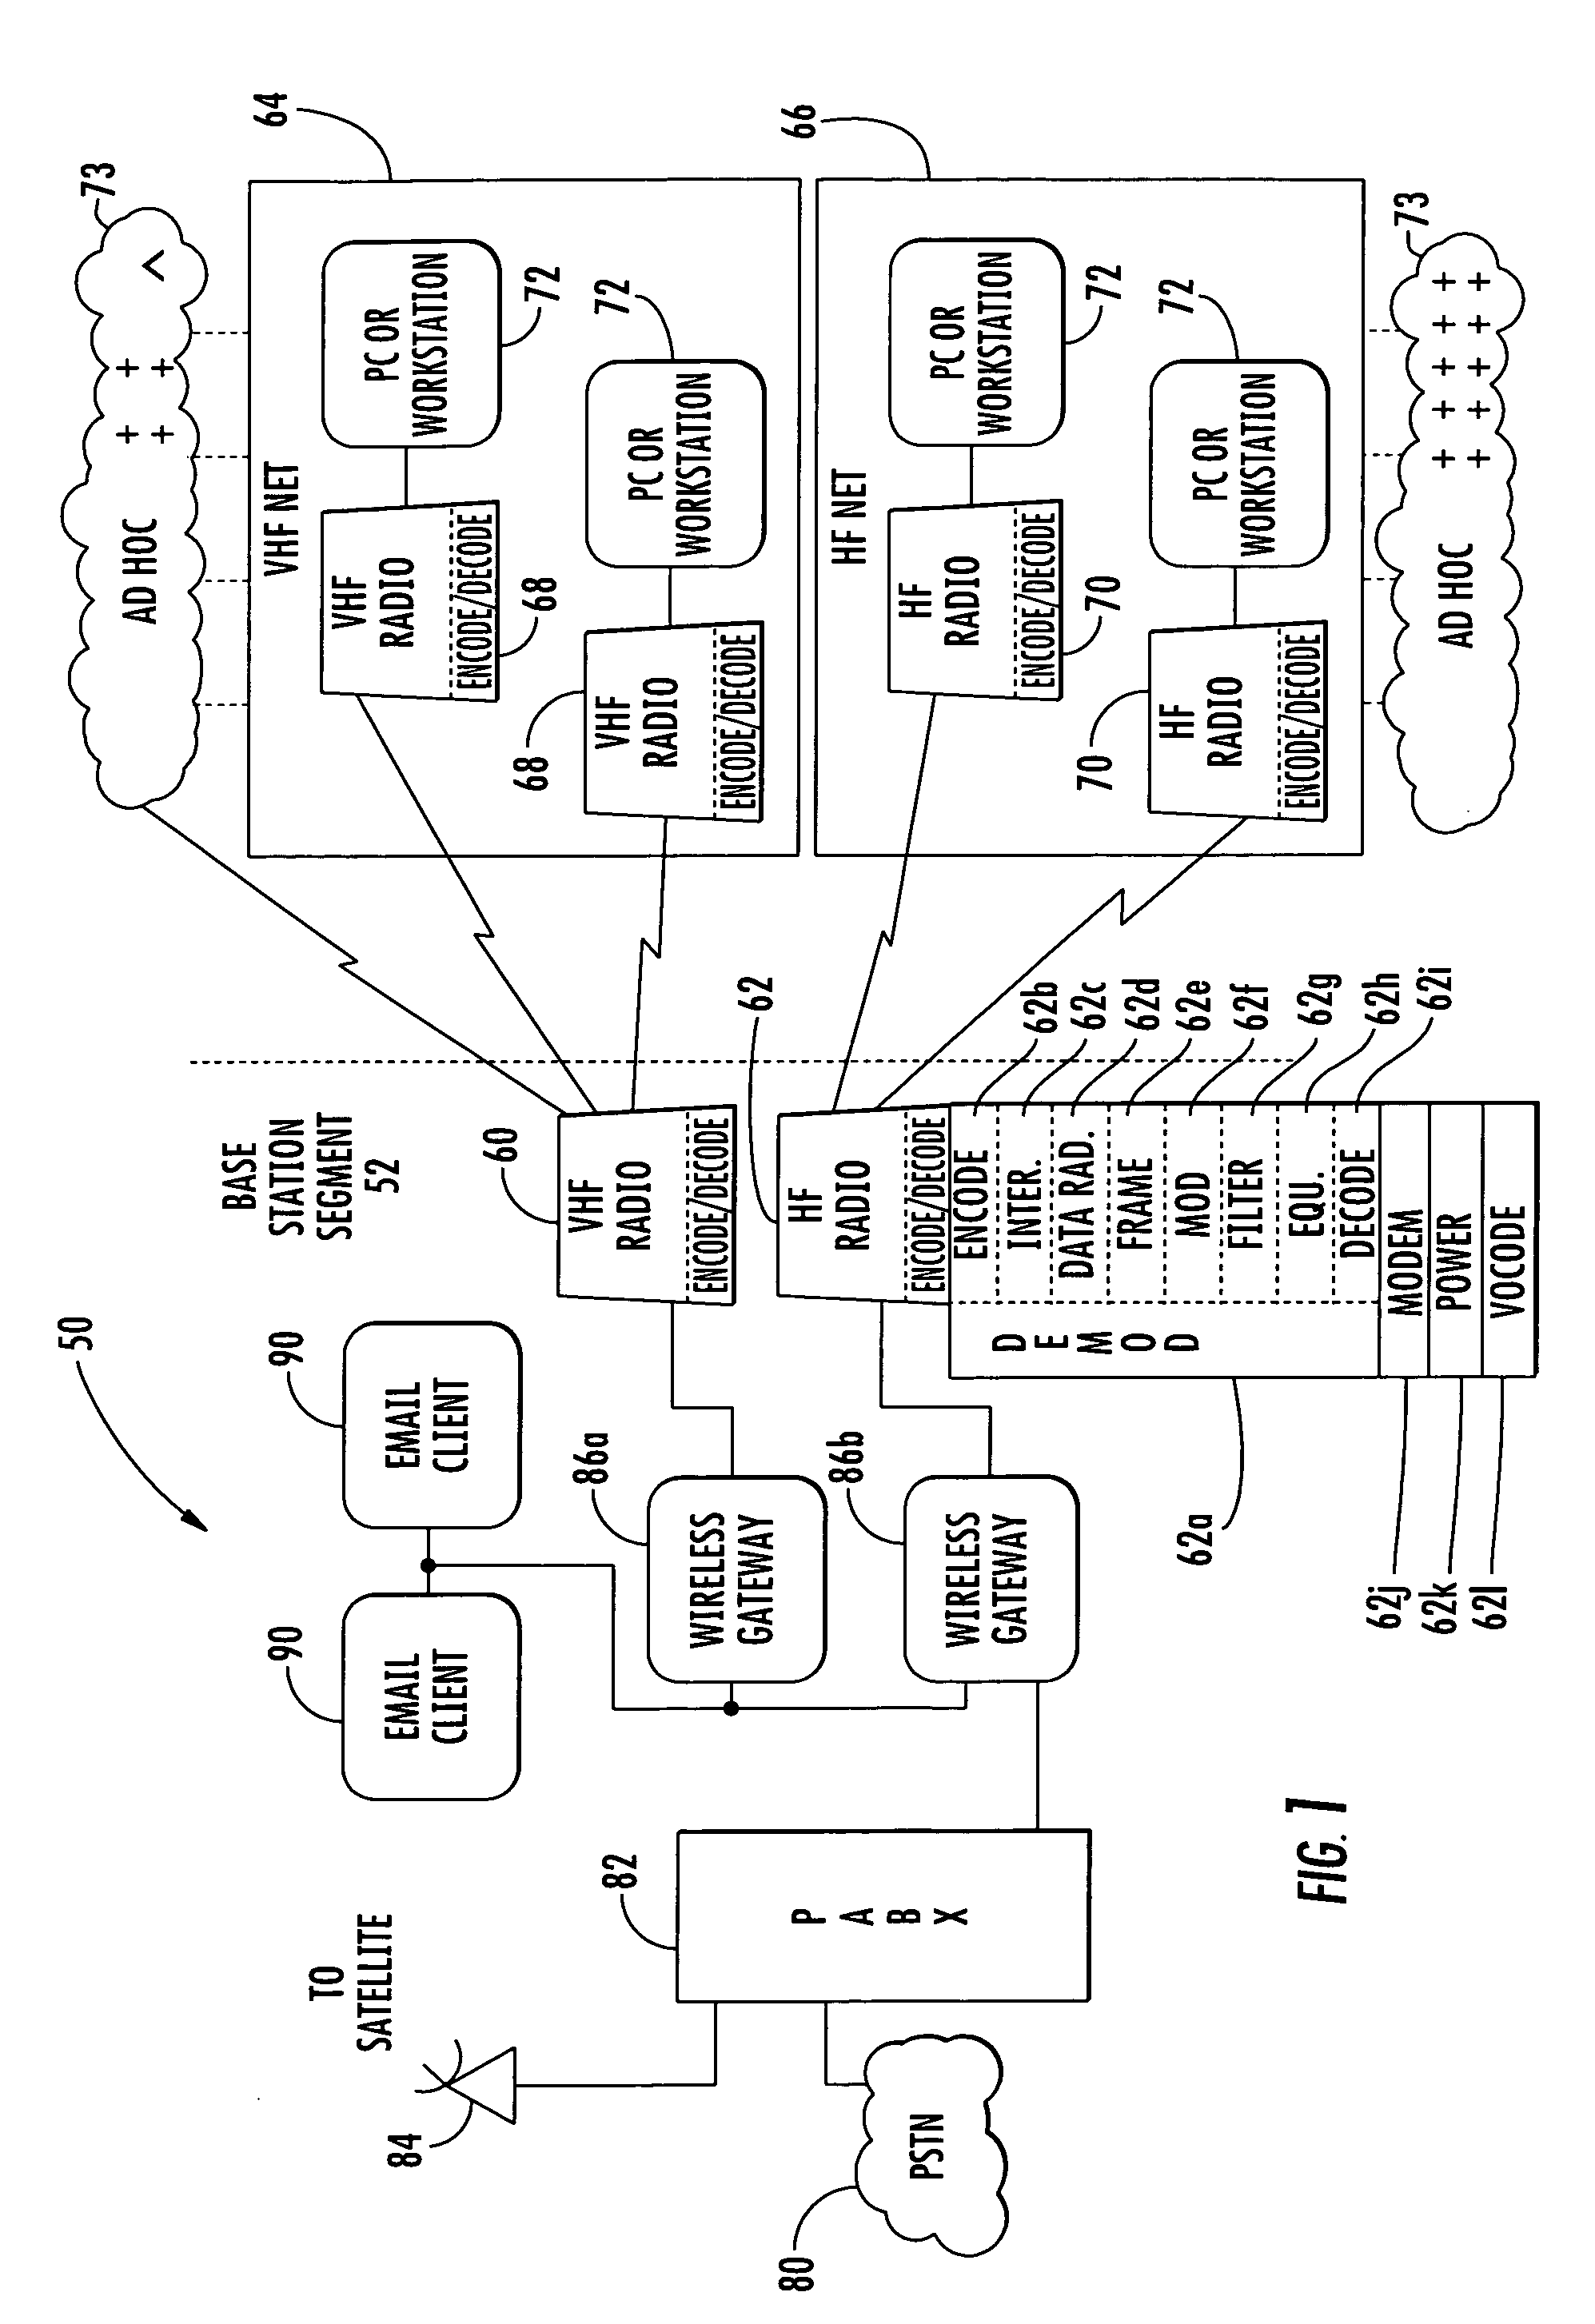 System and method for synchronizing TDMA mesh networks